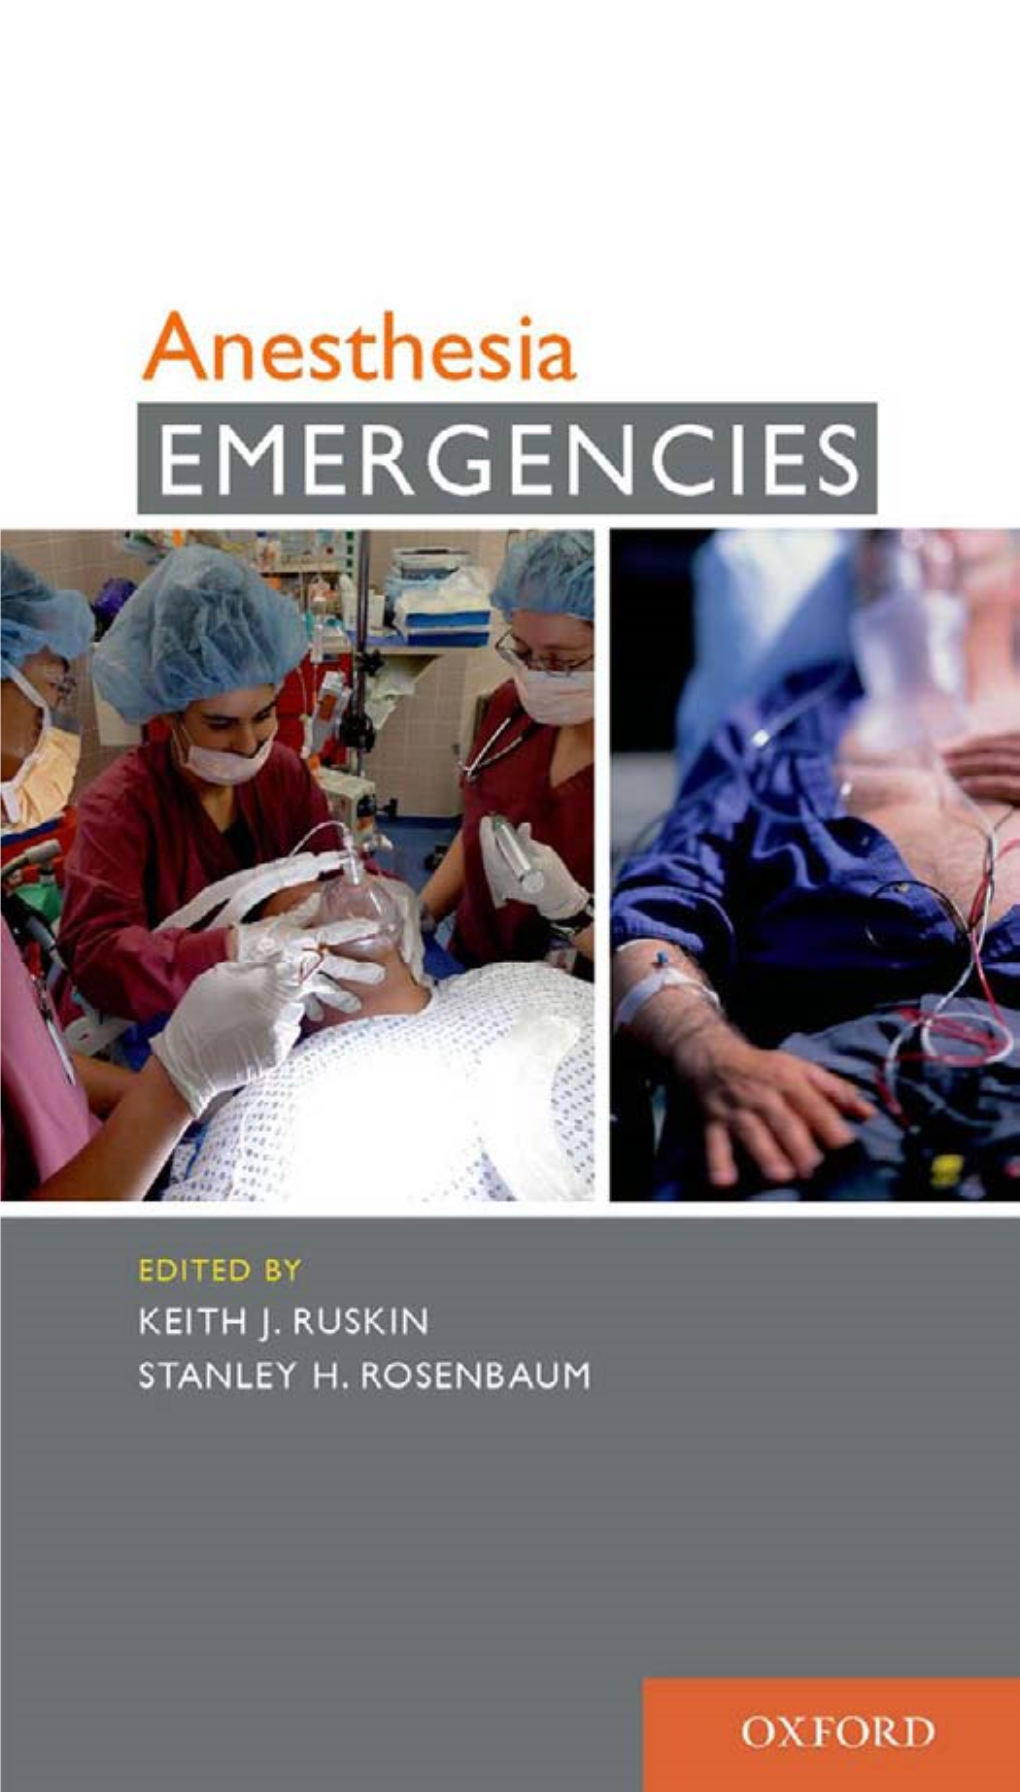 Anesthesia Emergencies This Material Is Not Intended to Be, and Should Not Be Considered, a Substitute for Medical Or Other Professional Advice